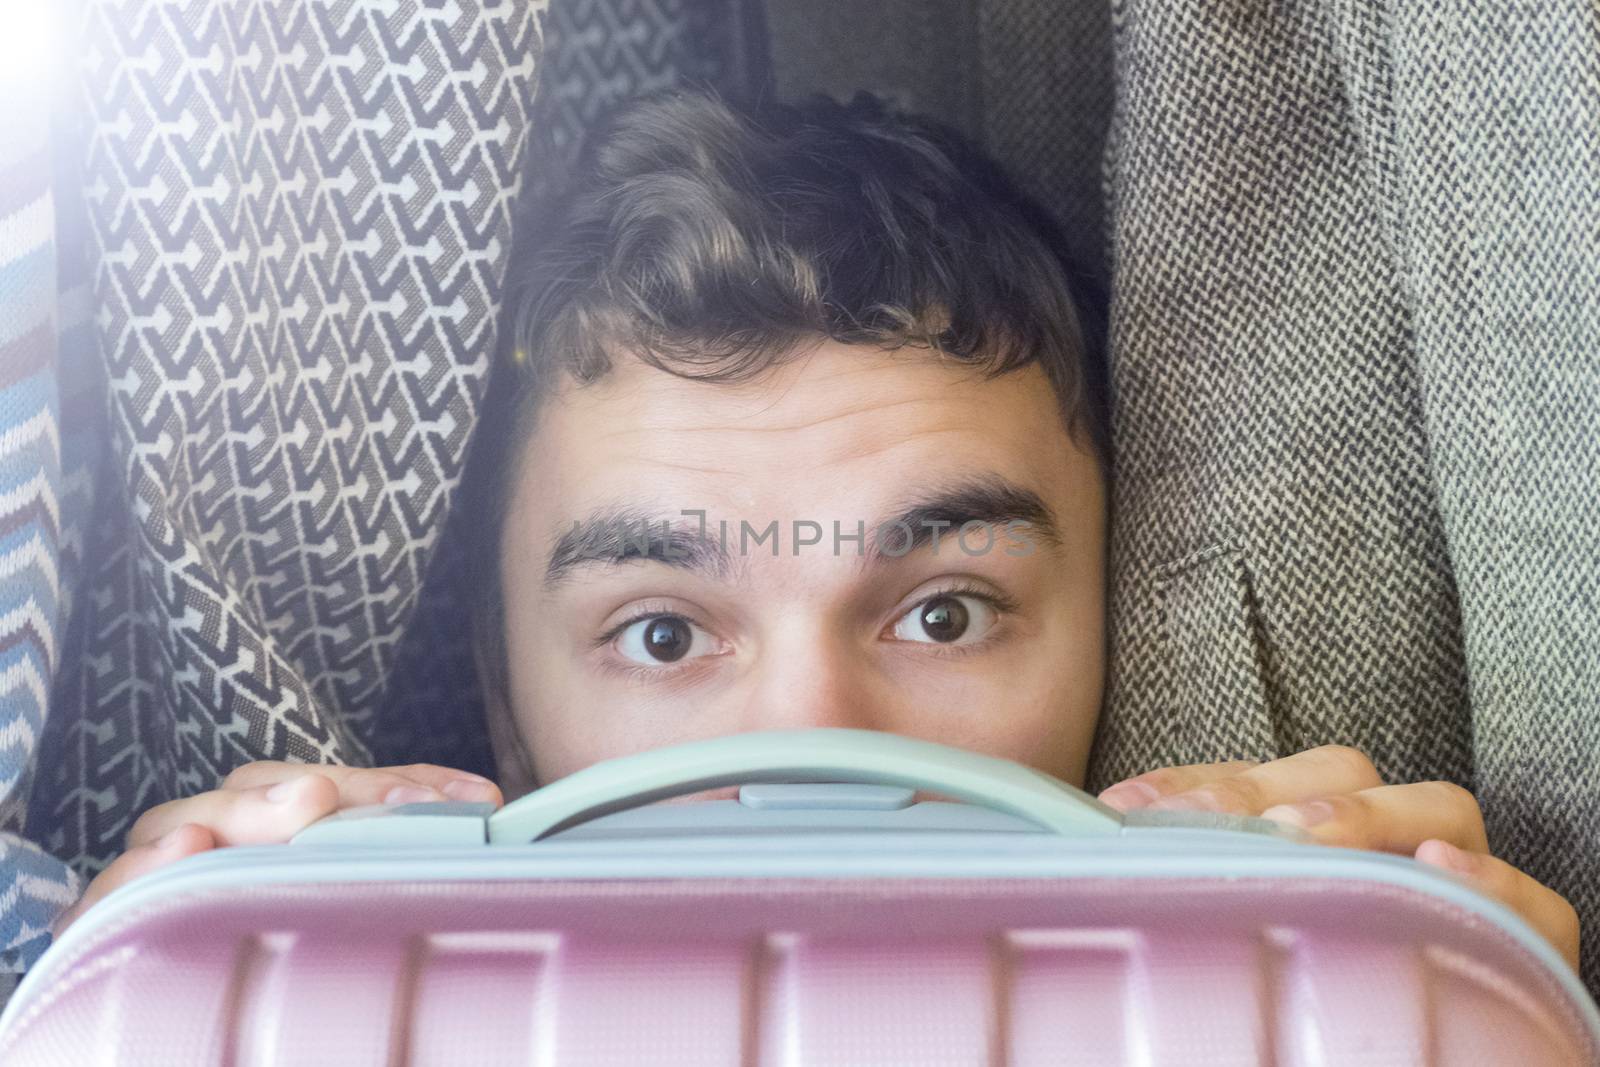 A young man hides in a closet covering yourself with a suitcase